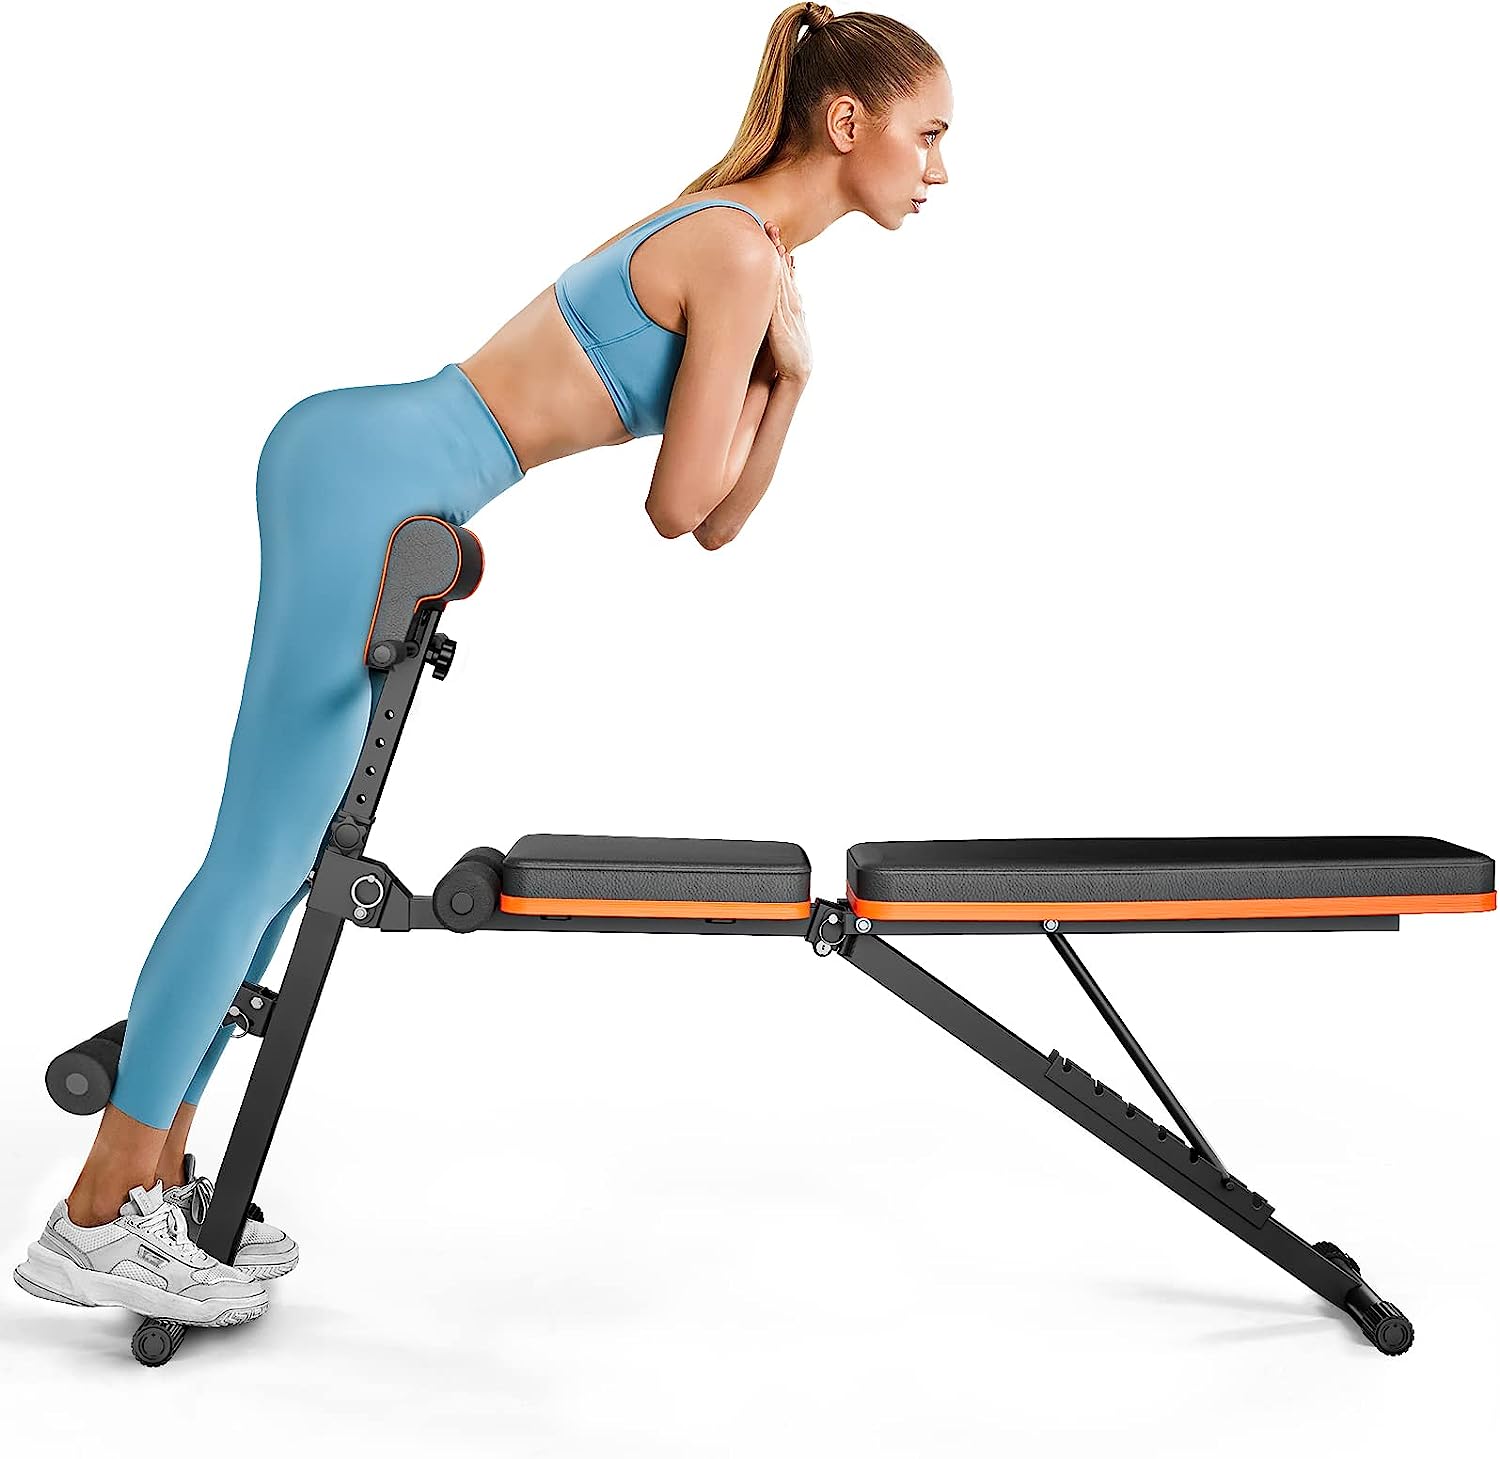 PERLECARE Adjustable Weight Bench for Full Body Workout, All-in-one Exercise Bench Supports up to 772lbs, Foldable Flat, Incline, Decline Workout Bench with Two Exercise Bands for Home Gym 